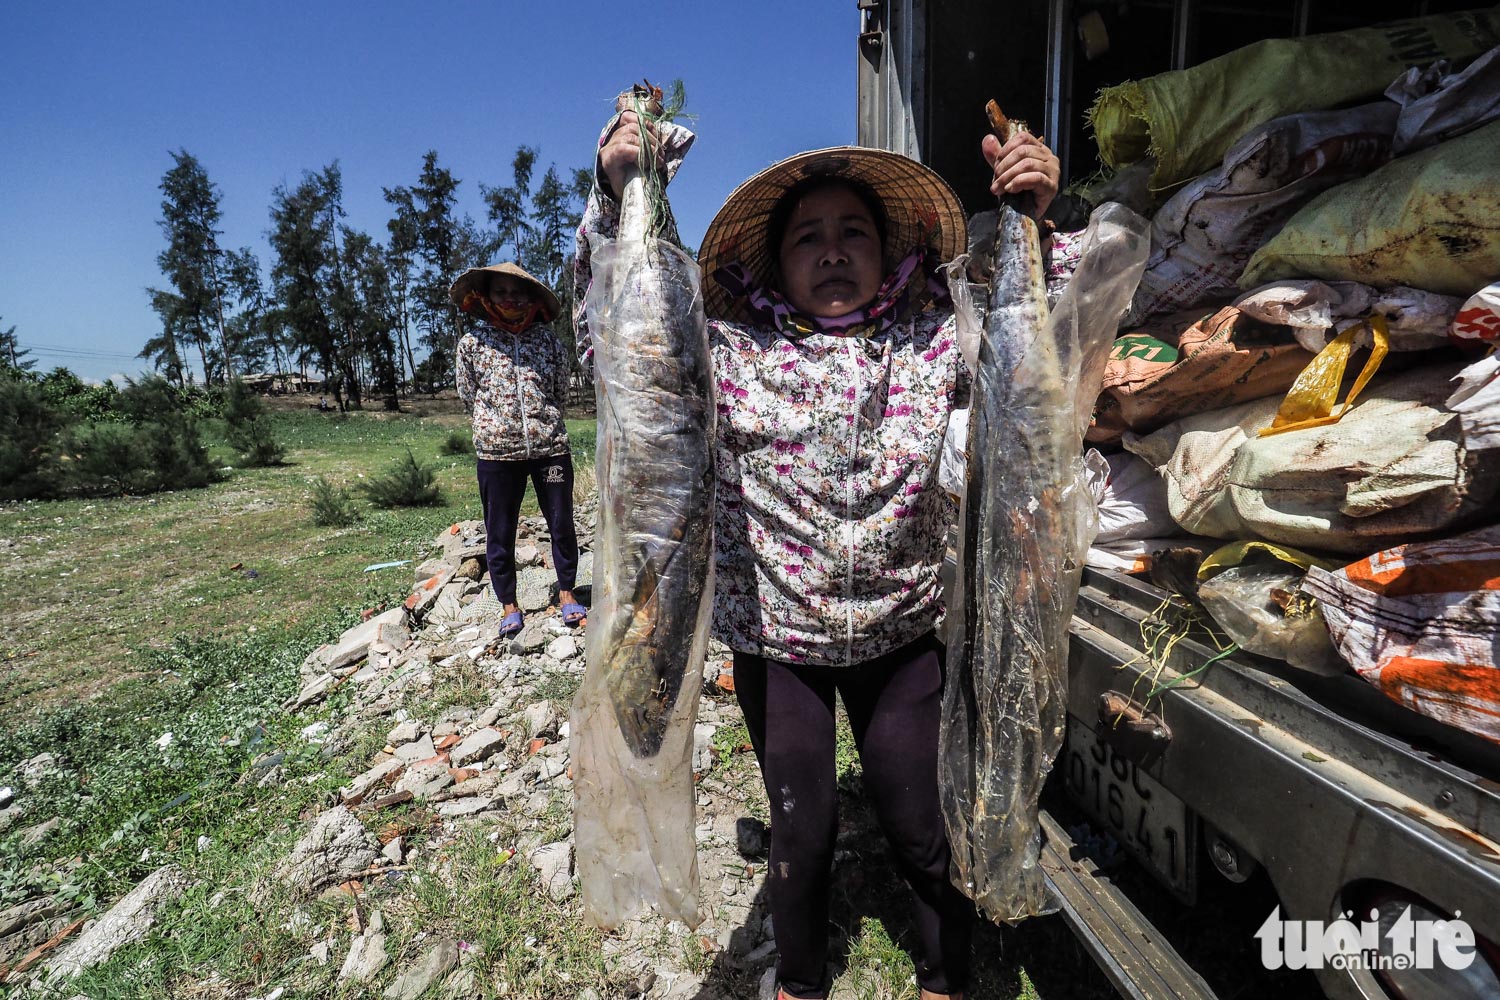 A resident displays two fish that await disposal.